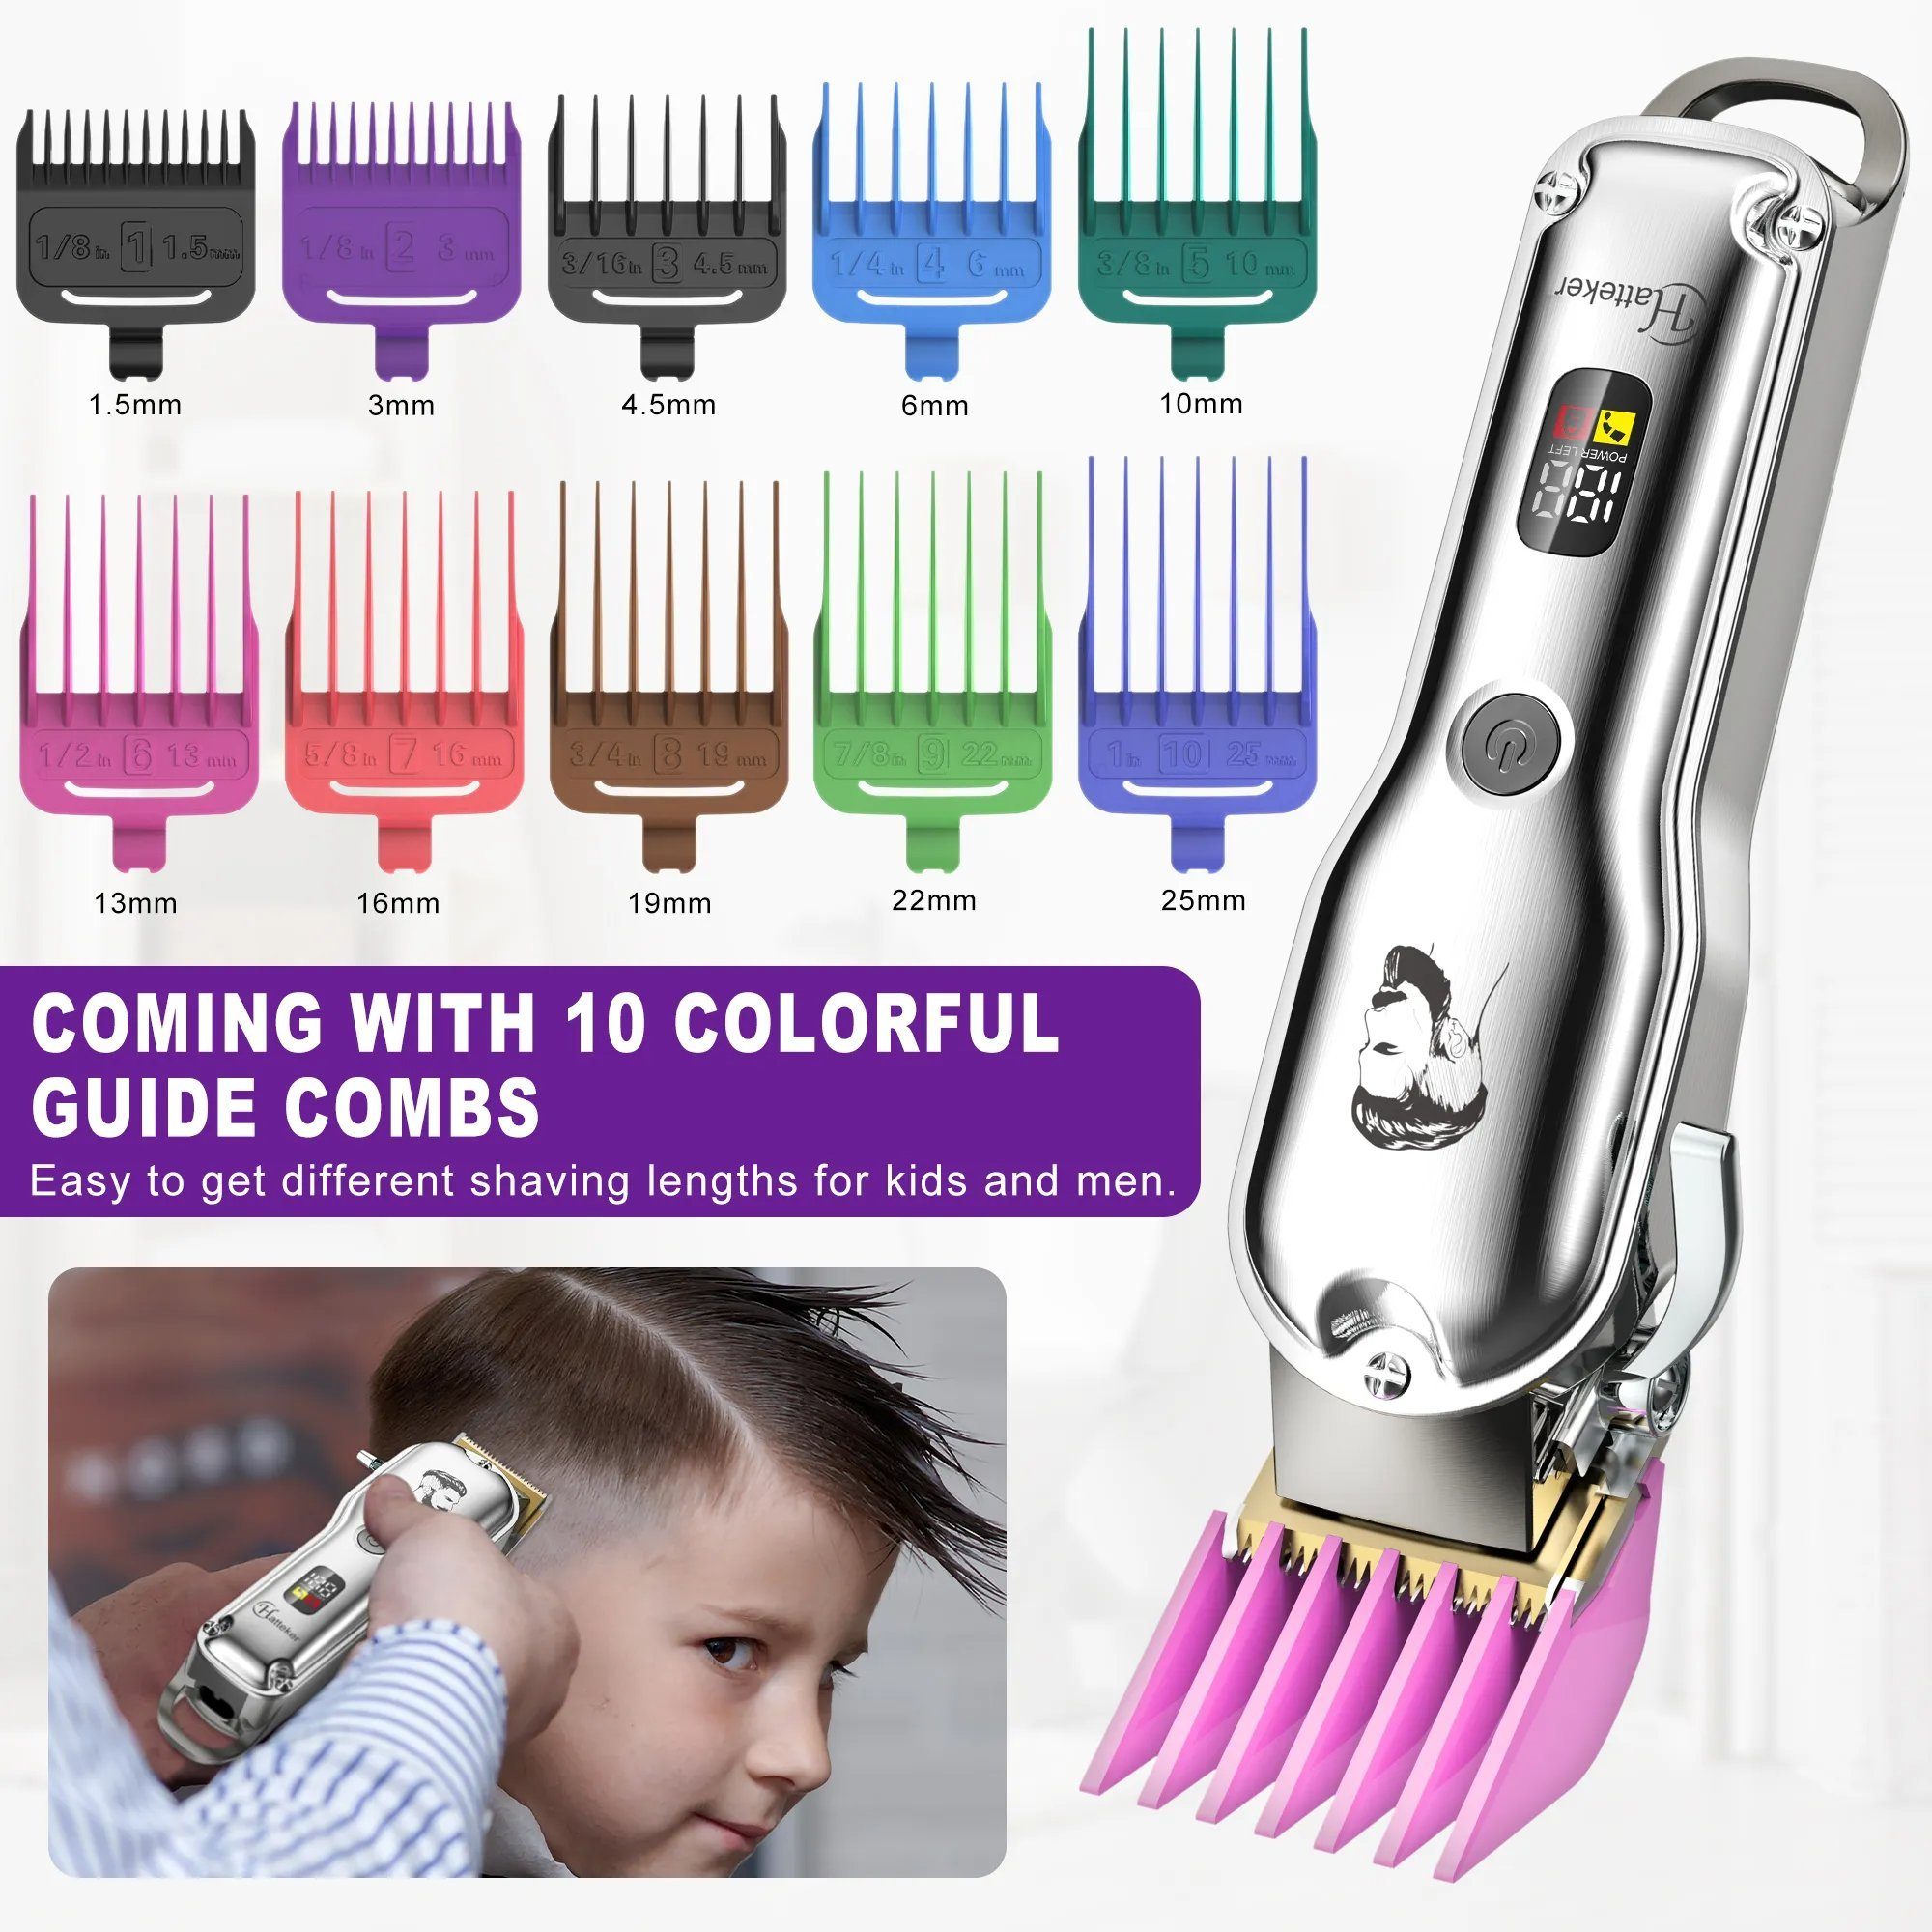 HATTEKER Beauty-Trimmer Professional Barbers Grooming Hair waschbar Colorful 2000 Combs Vollständig Rechargeable, Kit Clippers, mAh